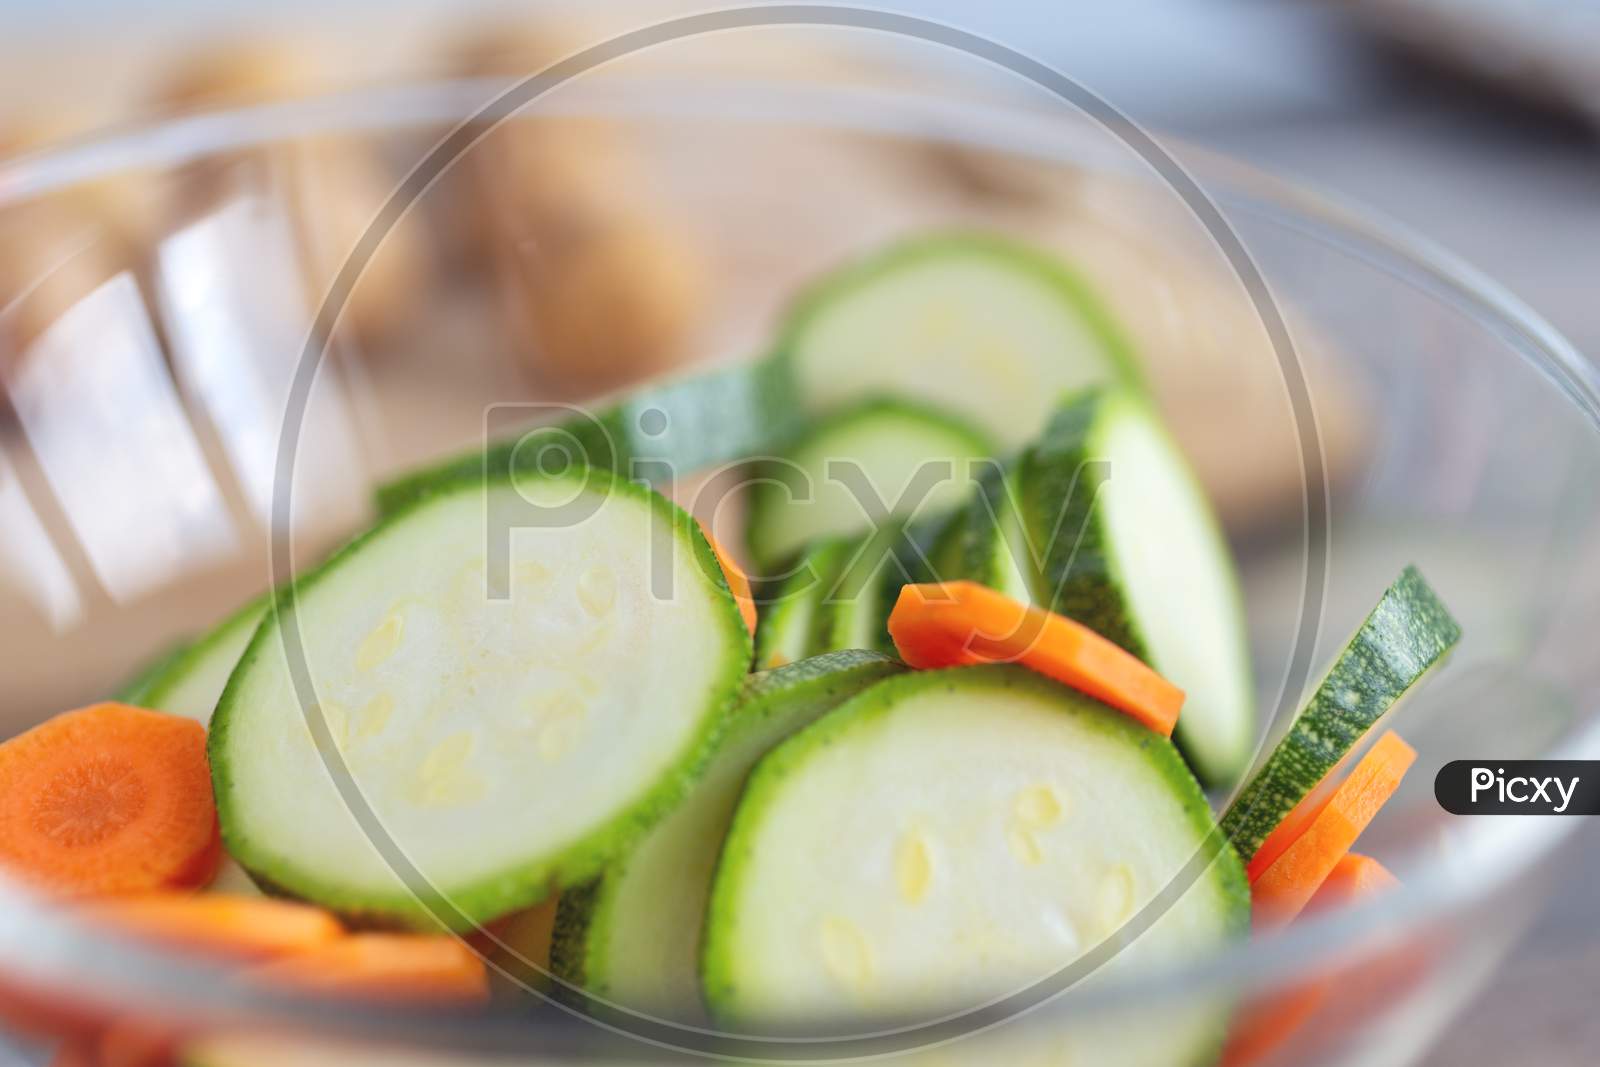 Close up of green zucchini cucumber and carrot slices in a bowl. Healthy food preparation concept